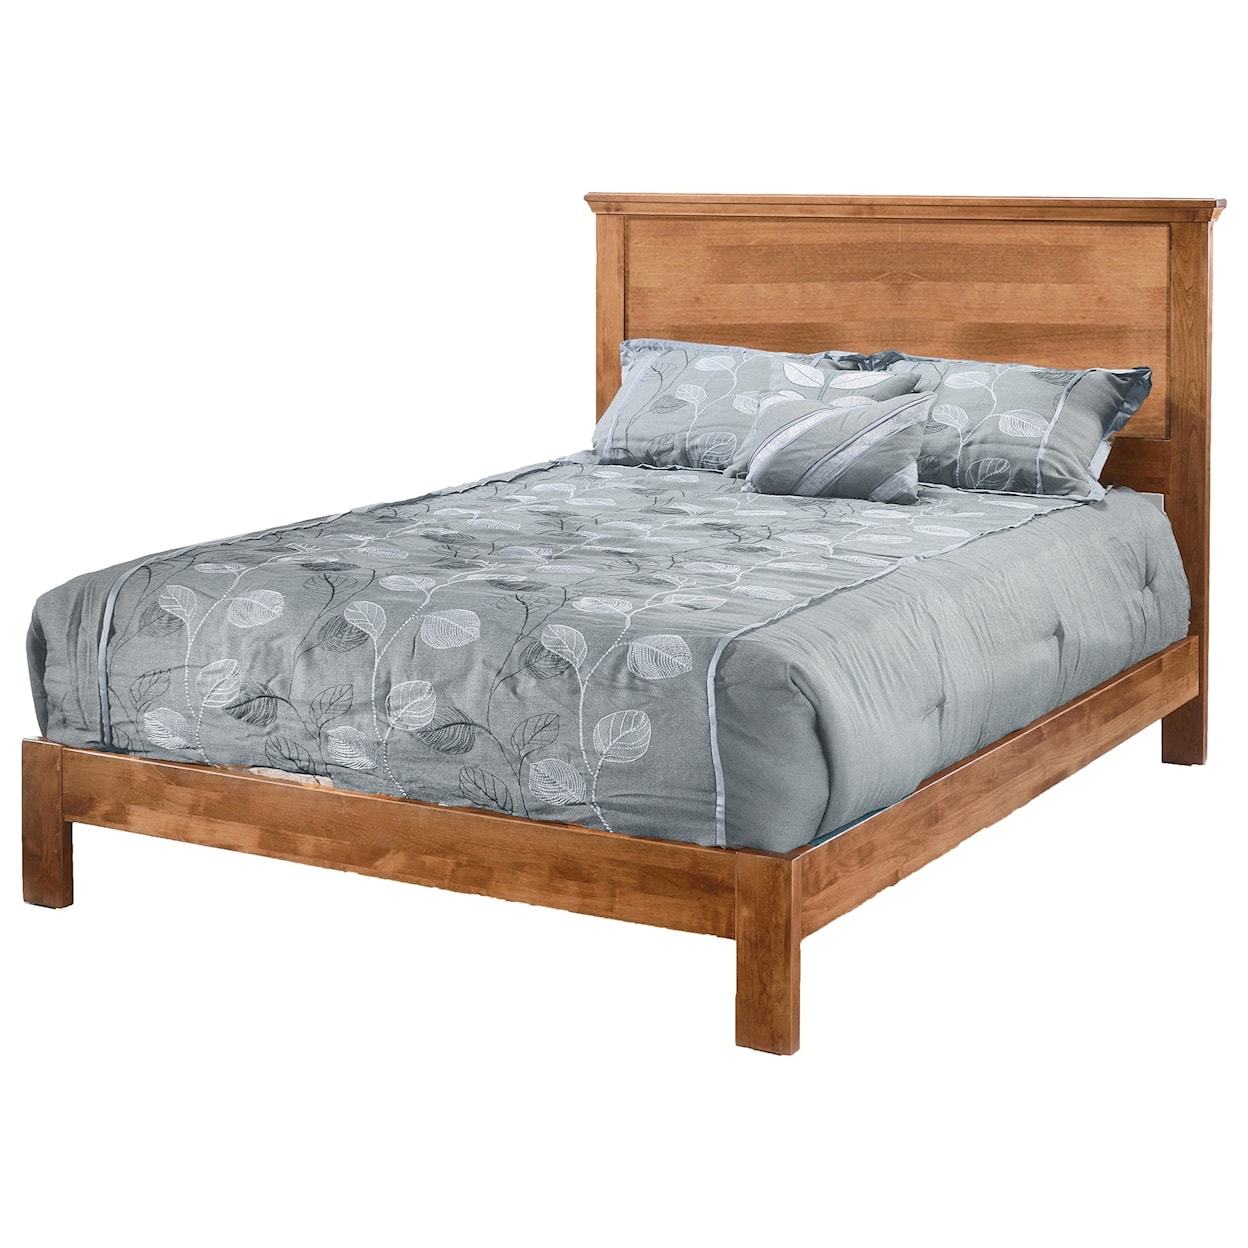 Archbold Furniture Misc. Beds Full Plank Bed